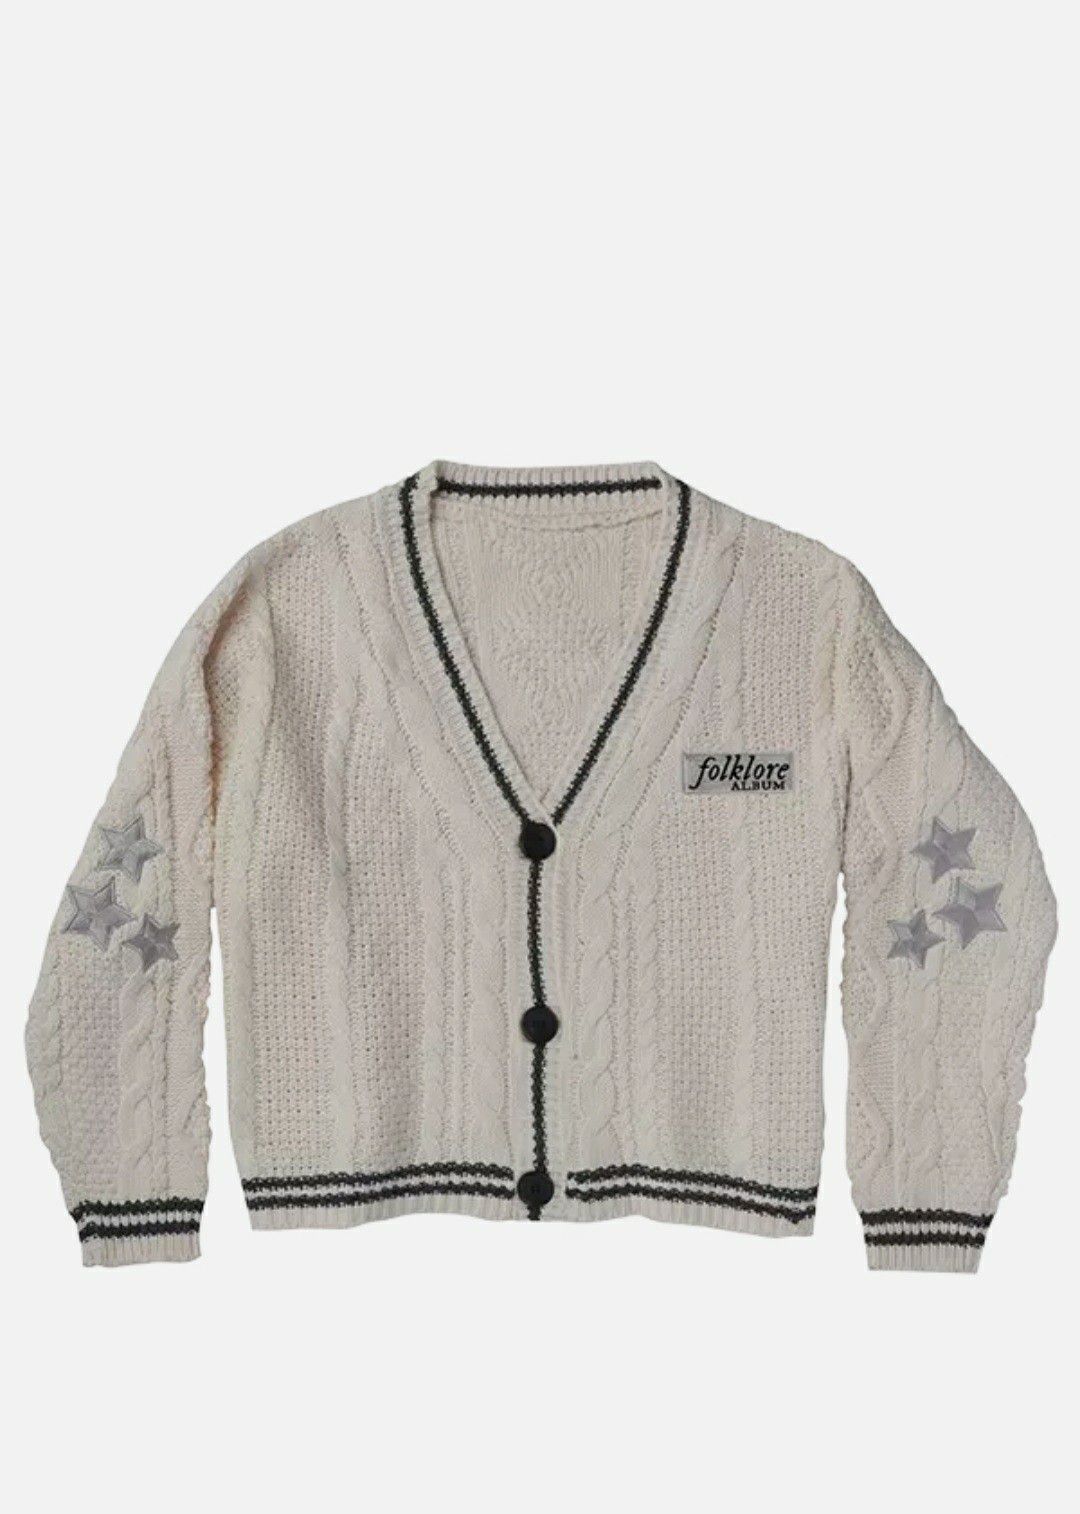 Taylor Swift Cardigan FOLKLORE Sweater M/L Cable Knit IN HAND 100% New! AUTH!